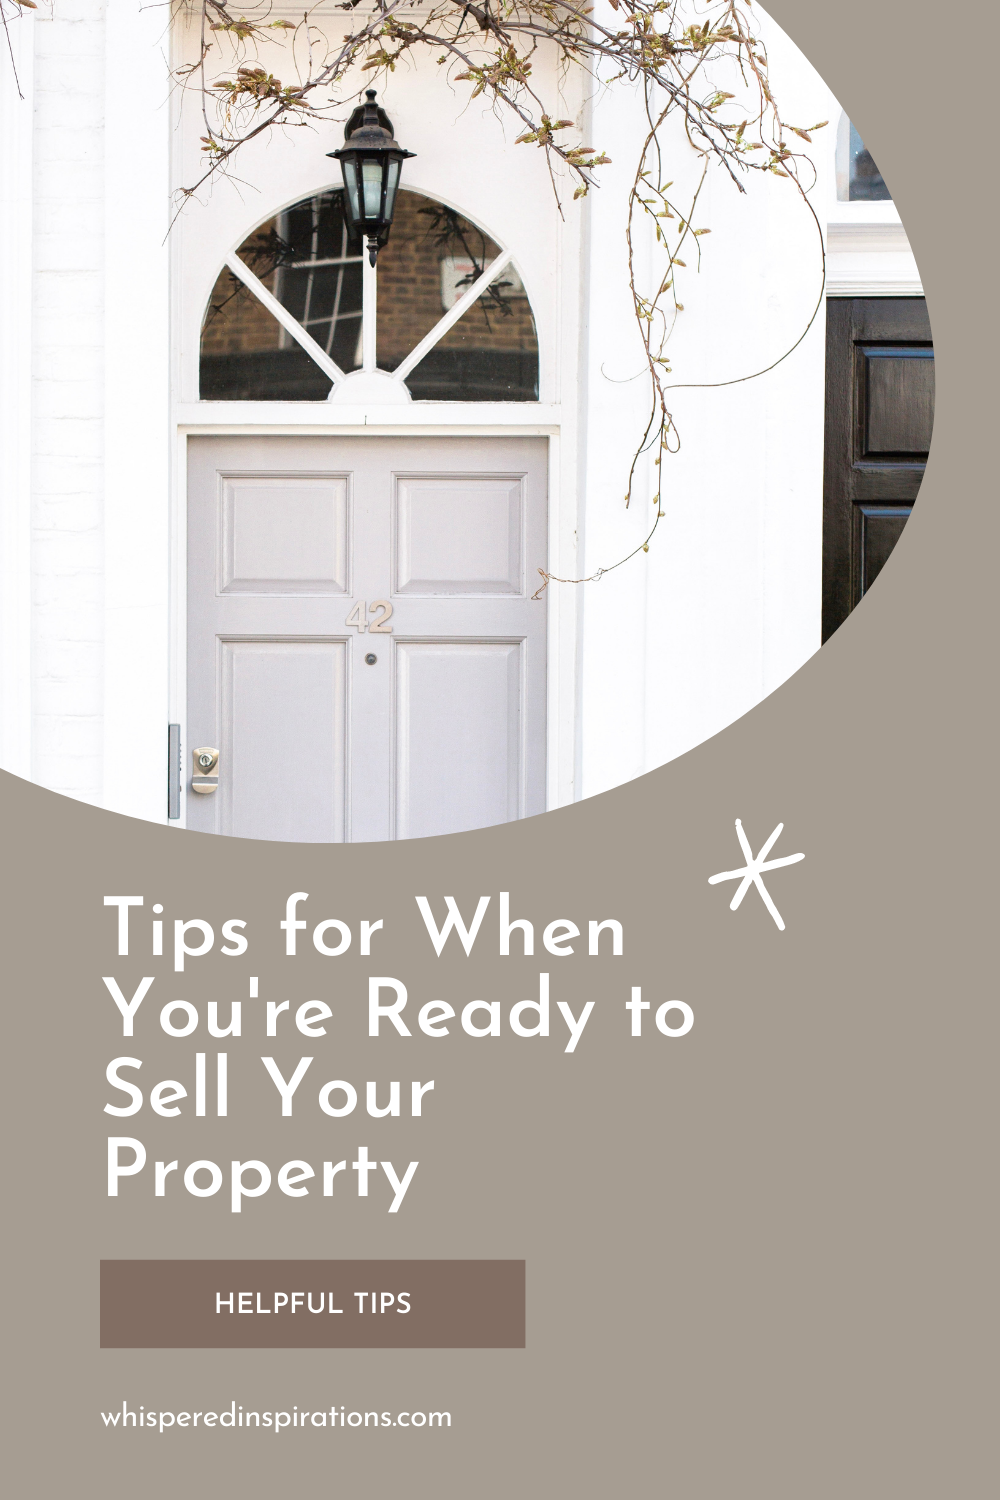 A white building with a grey door. Above the grey door there is an angled window. This article covers tips for when you're ready to sell your property.